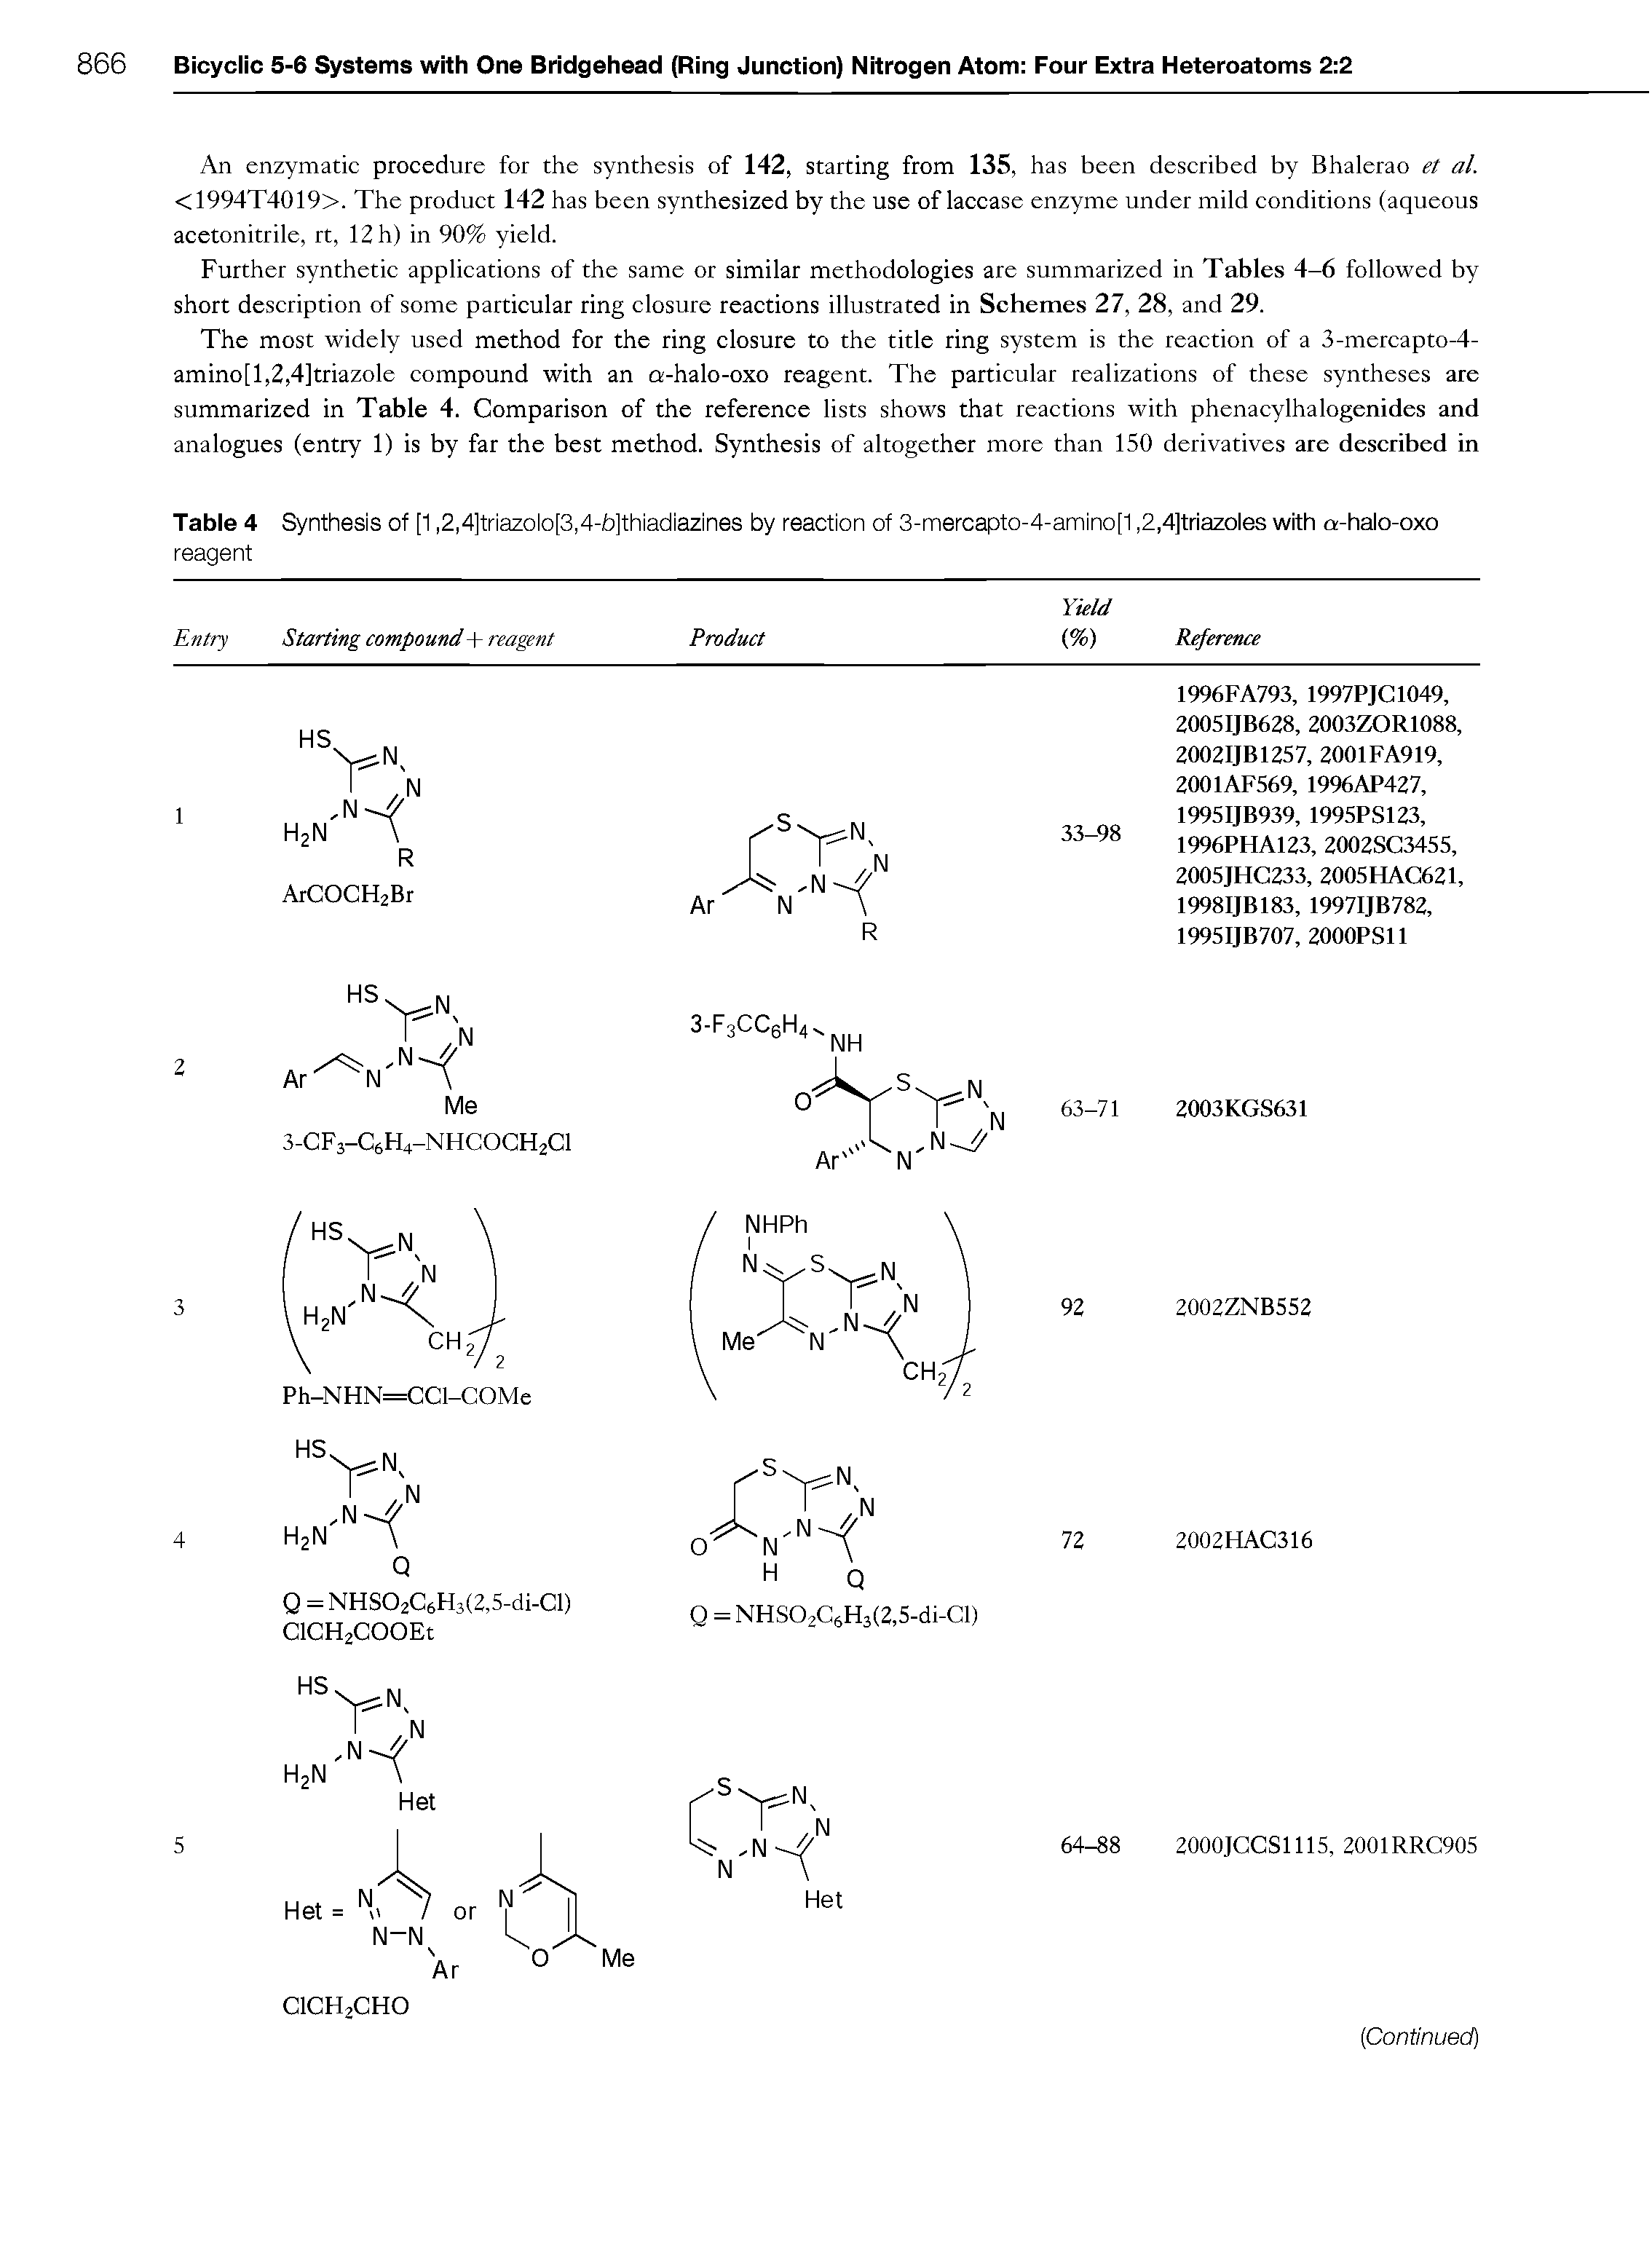 Table 4 Synthesis of [1,2,4]triazolo[3,4-b]thiadiazines by reaction of 3-mercapto-4-amino[1,2,4]triazoles with a-halo-oxo reagent...